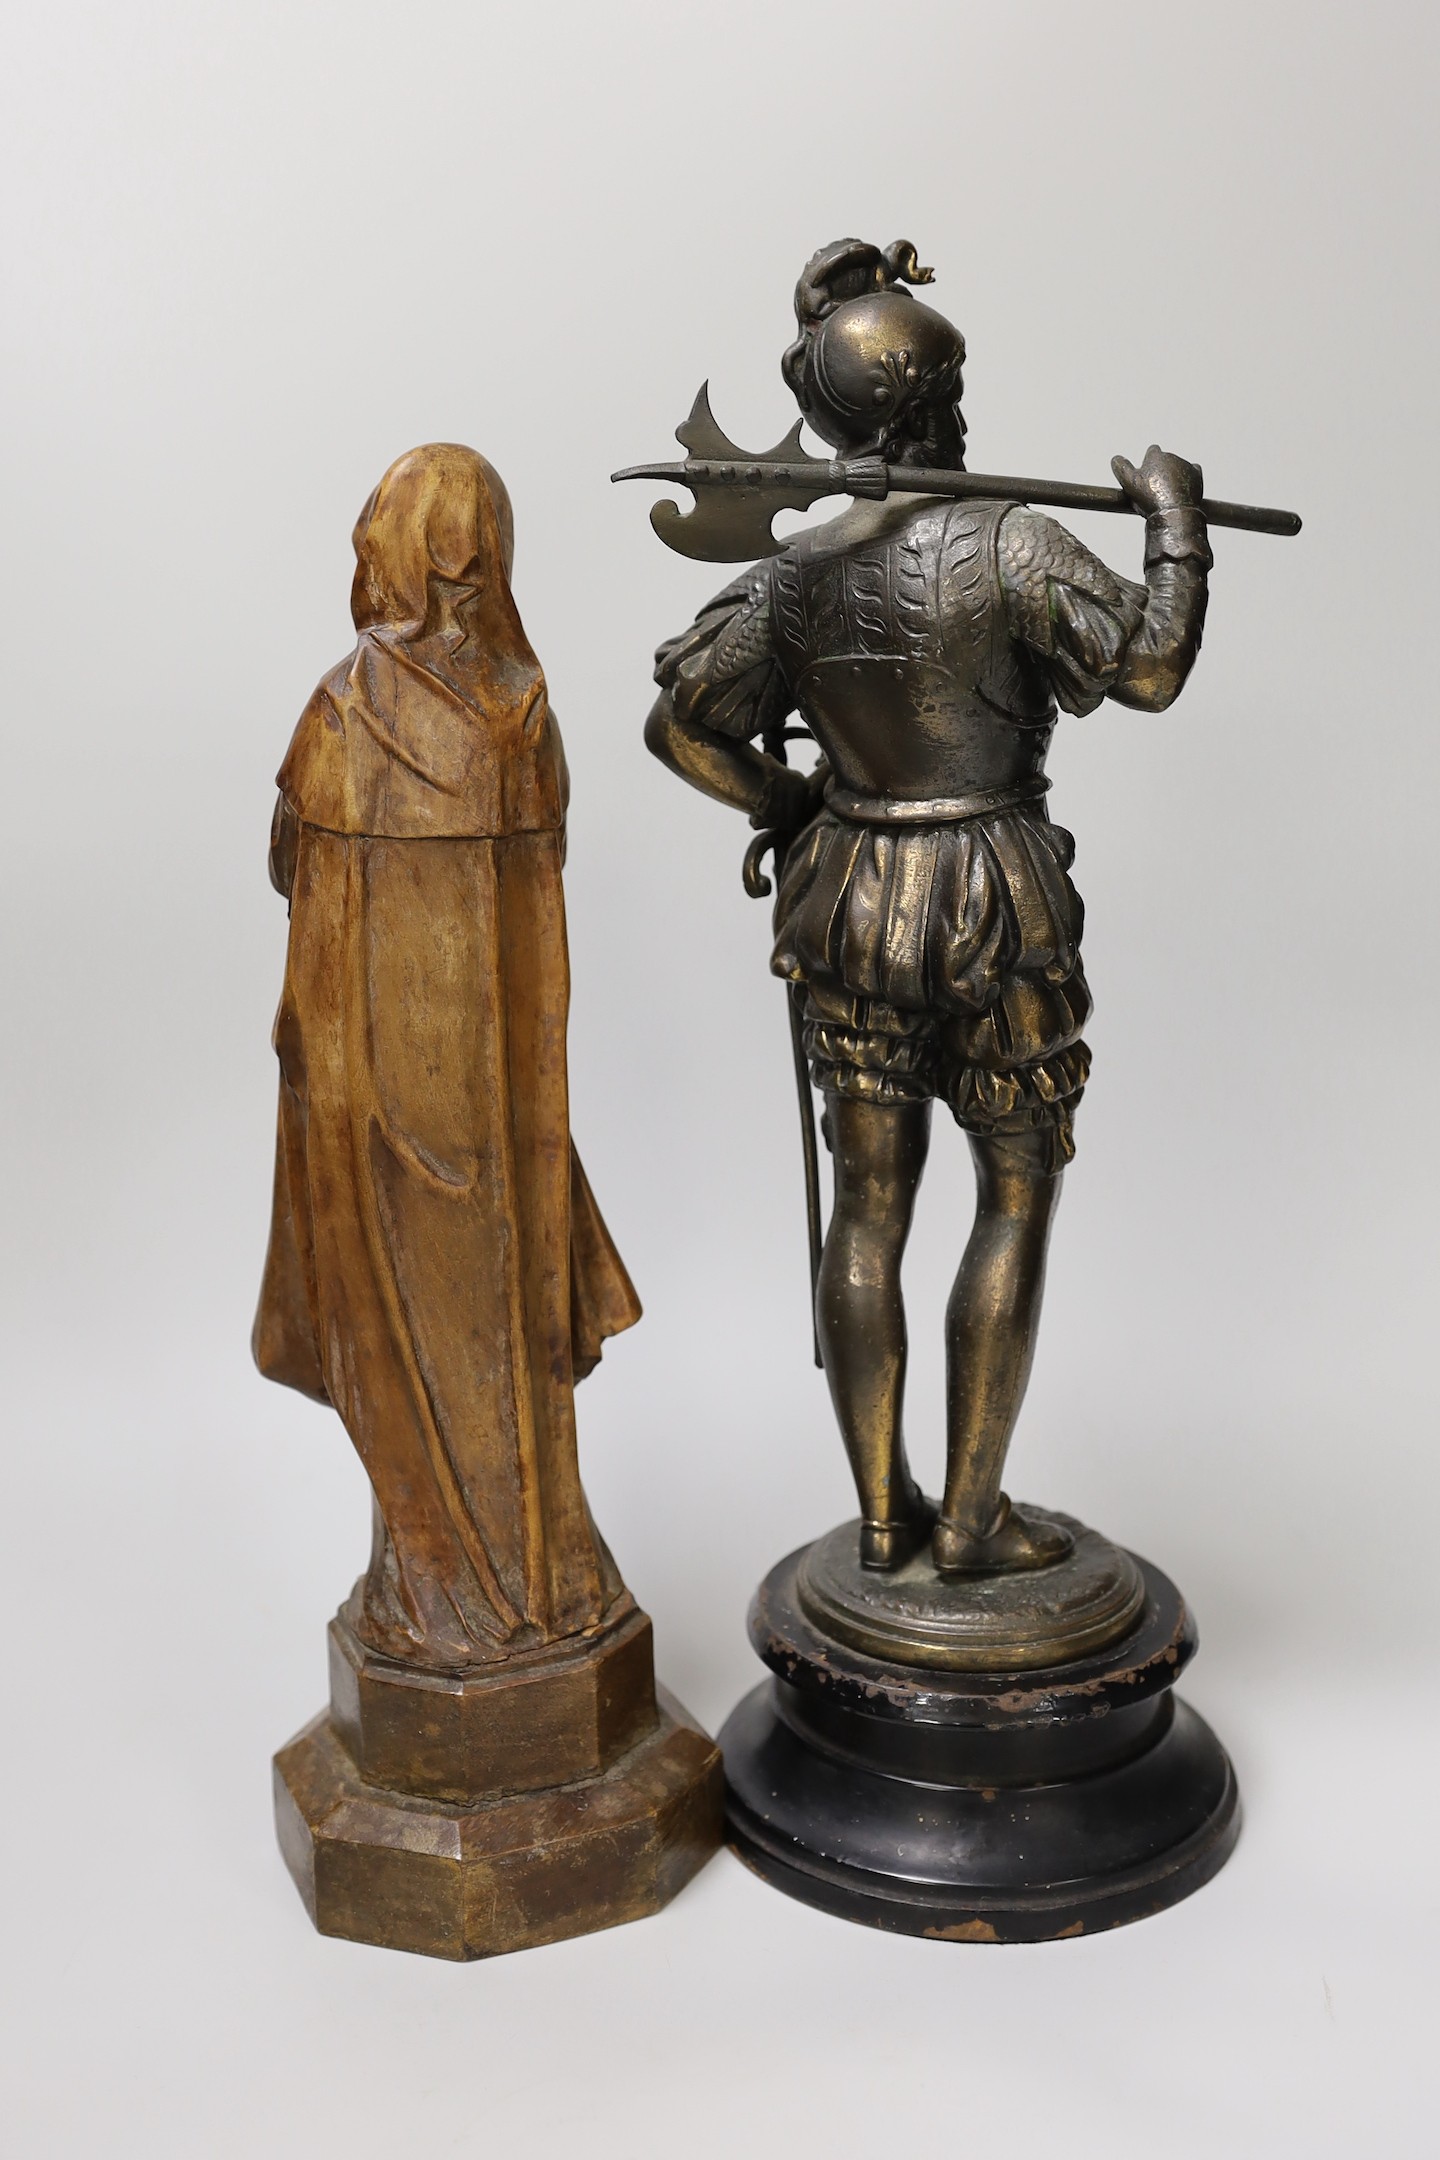 A 19th century carved wood figure of the ‘Virgin of Nuremberg’ together with a spelter figure of a guard. Tallest 38cm